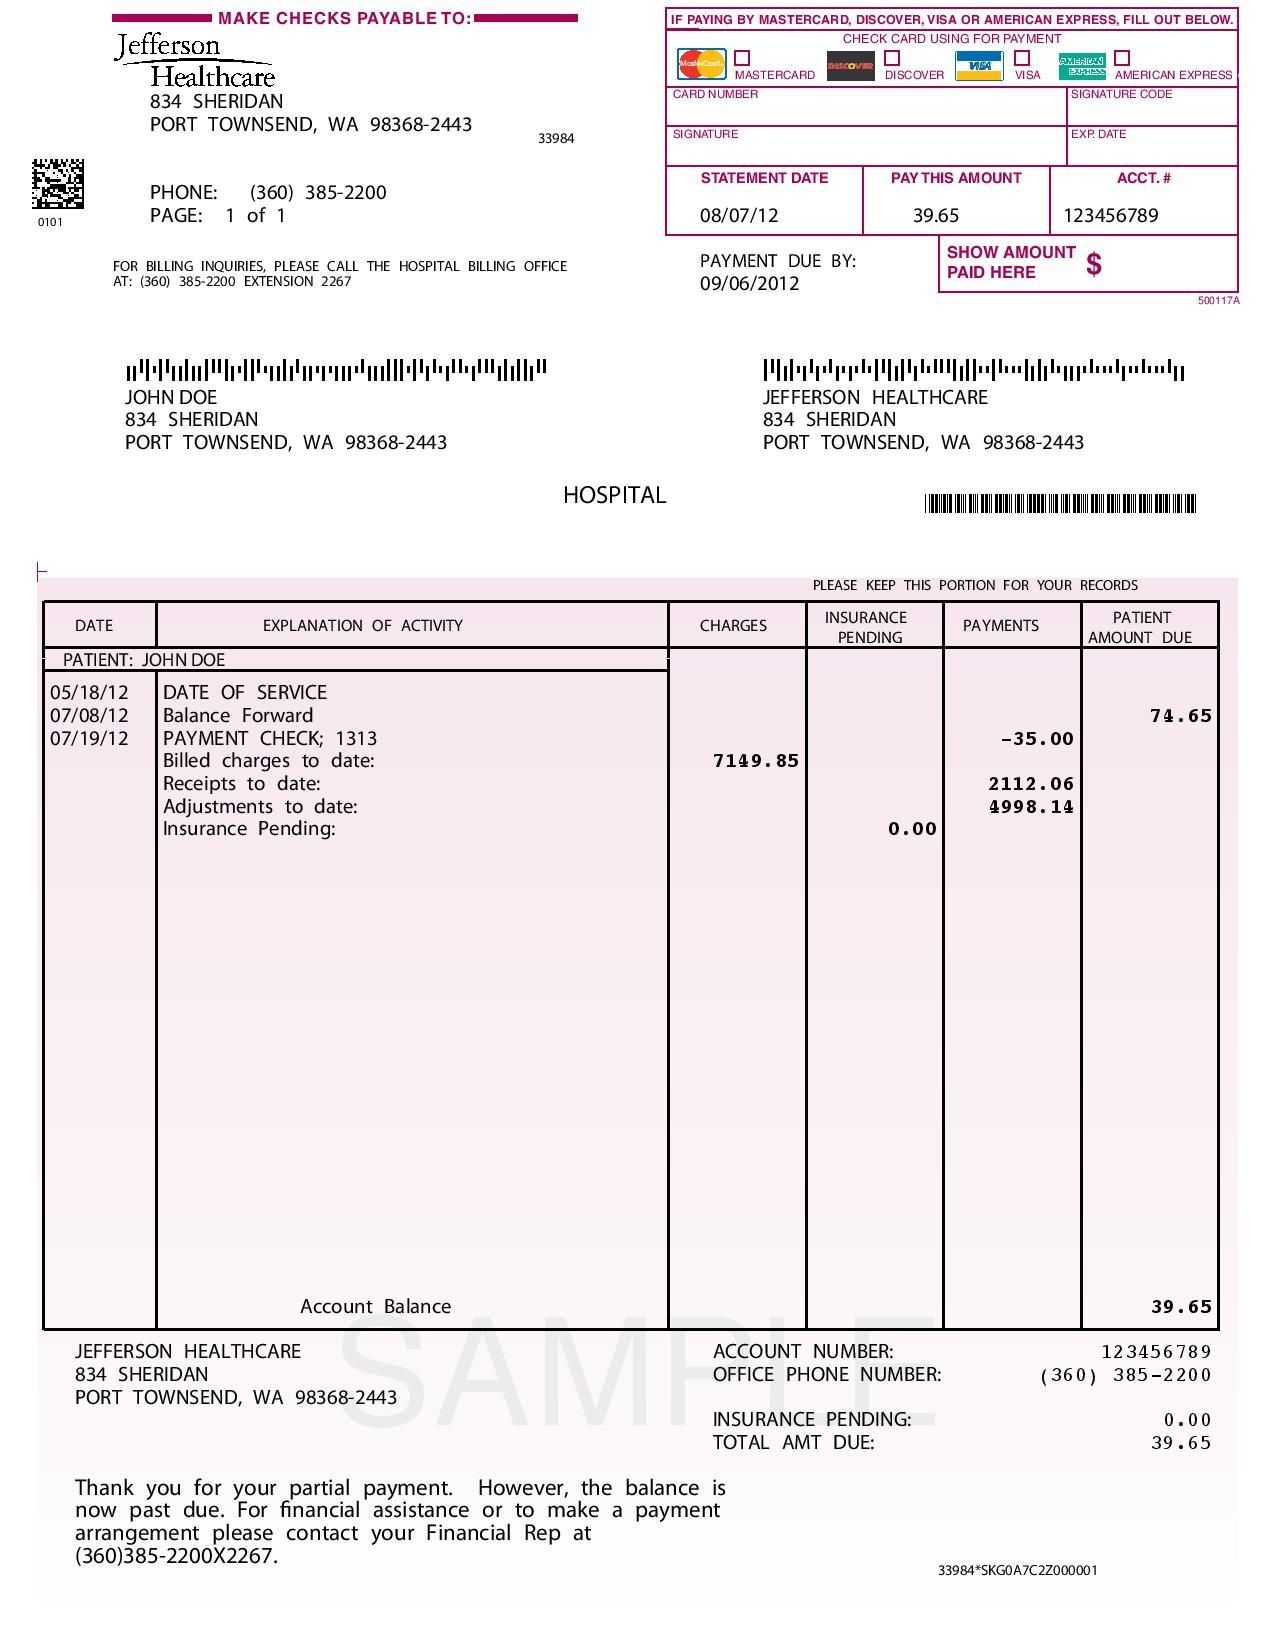 10 best images of sample of invoice for payment sample payment invoice sample pics